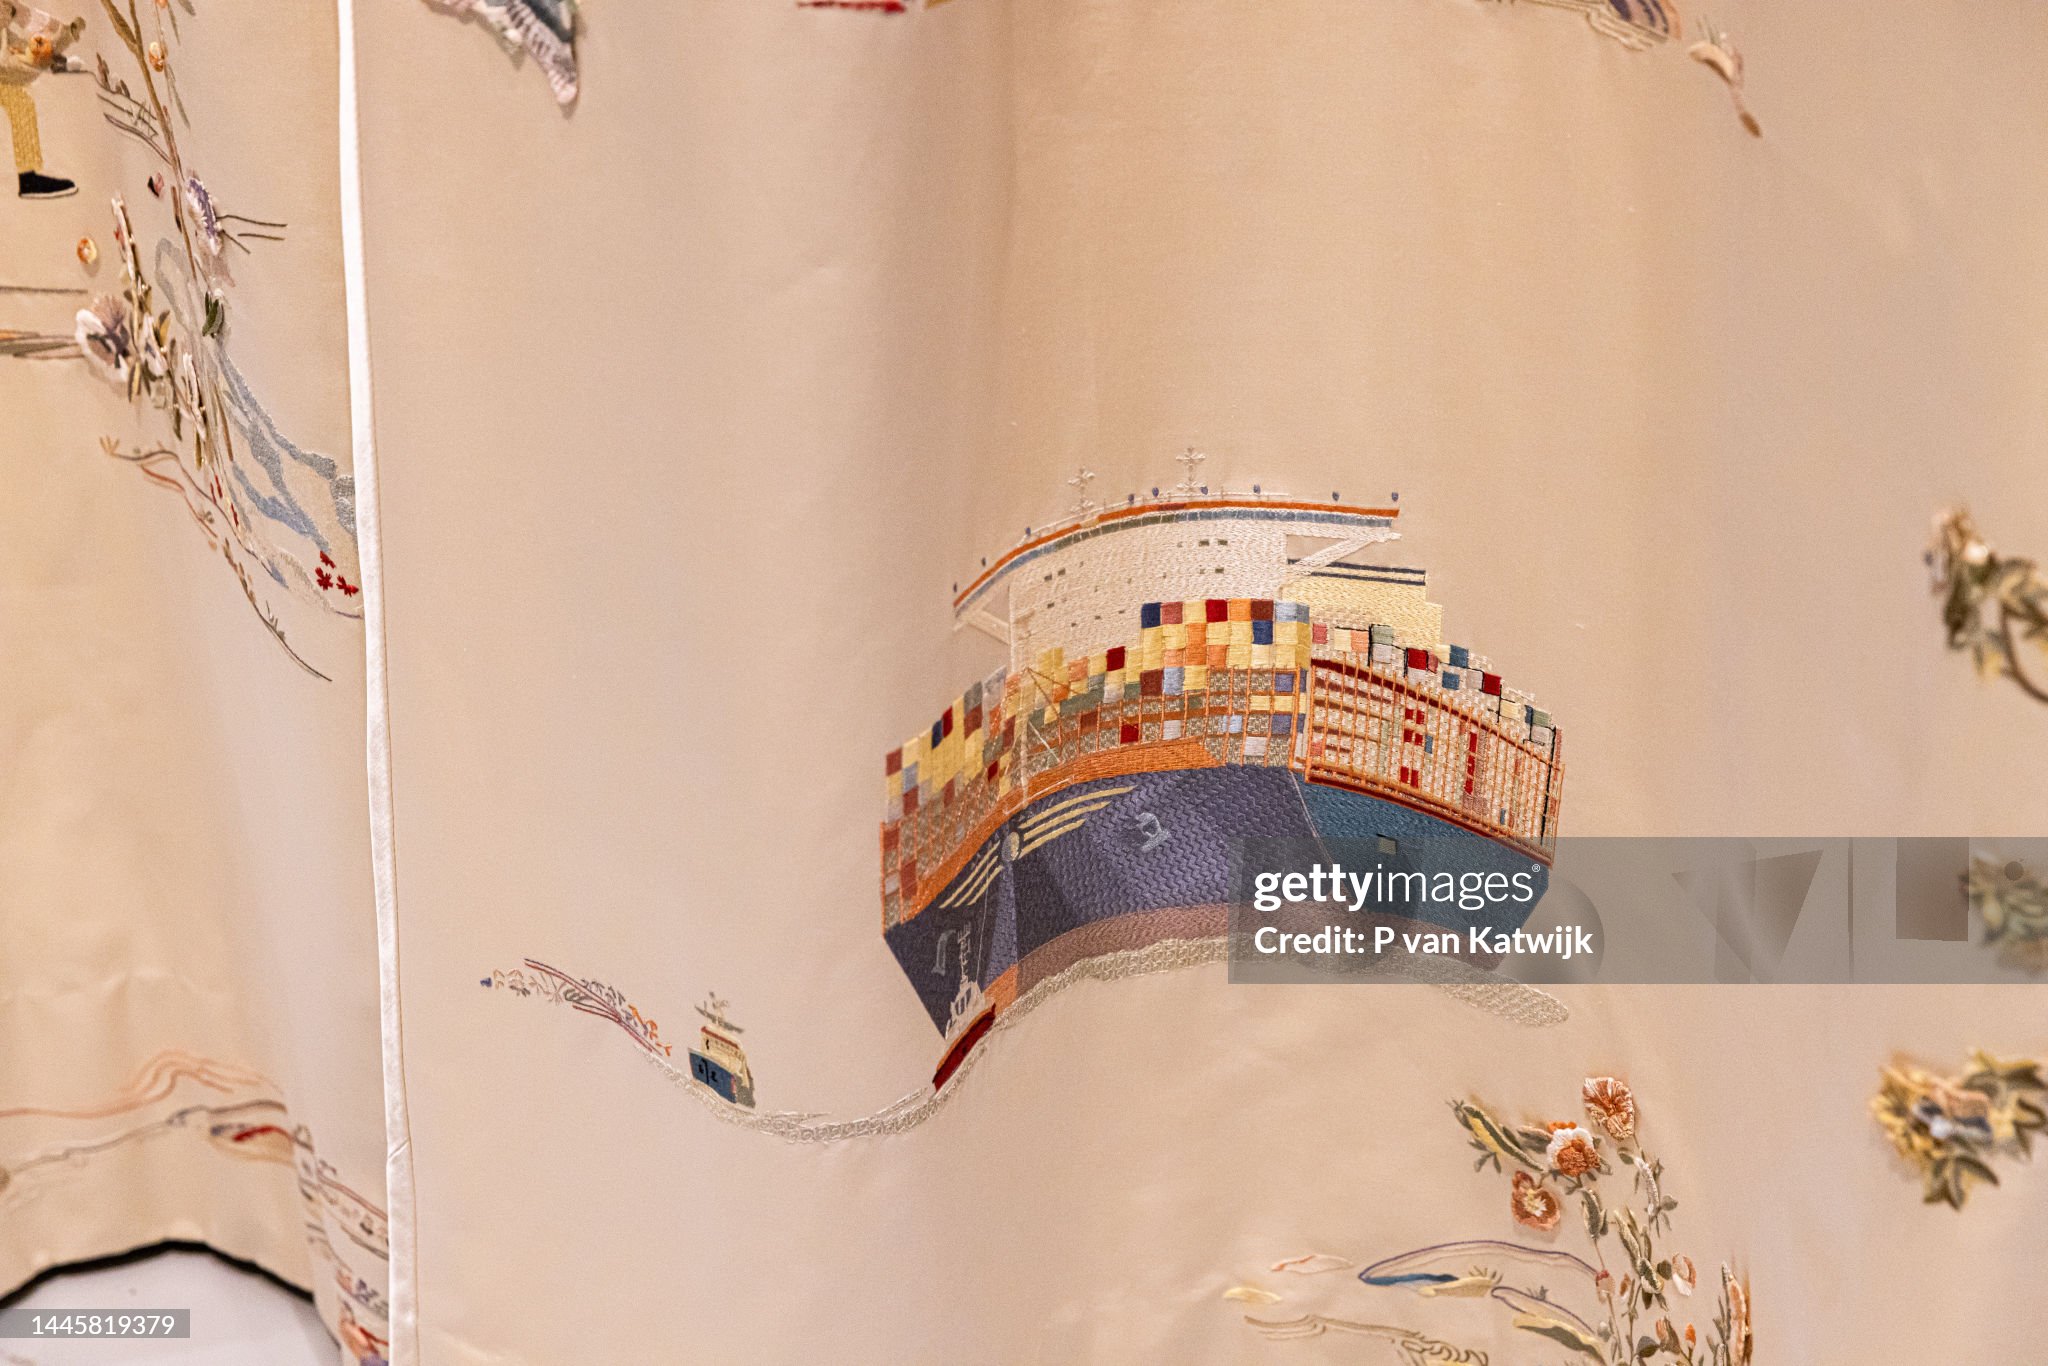 queen-maxima-of-the-netherlands-visits-textile-museum-to-present-her-new-curtains-for-palace.jpg?s=2048x2048&w=gi&k=20&c=cXSBNmPpnwcTnlkCsPt3uUQBdL4UDVOlbygJTMMZSMg=